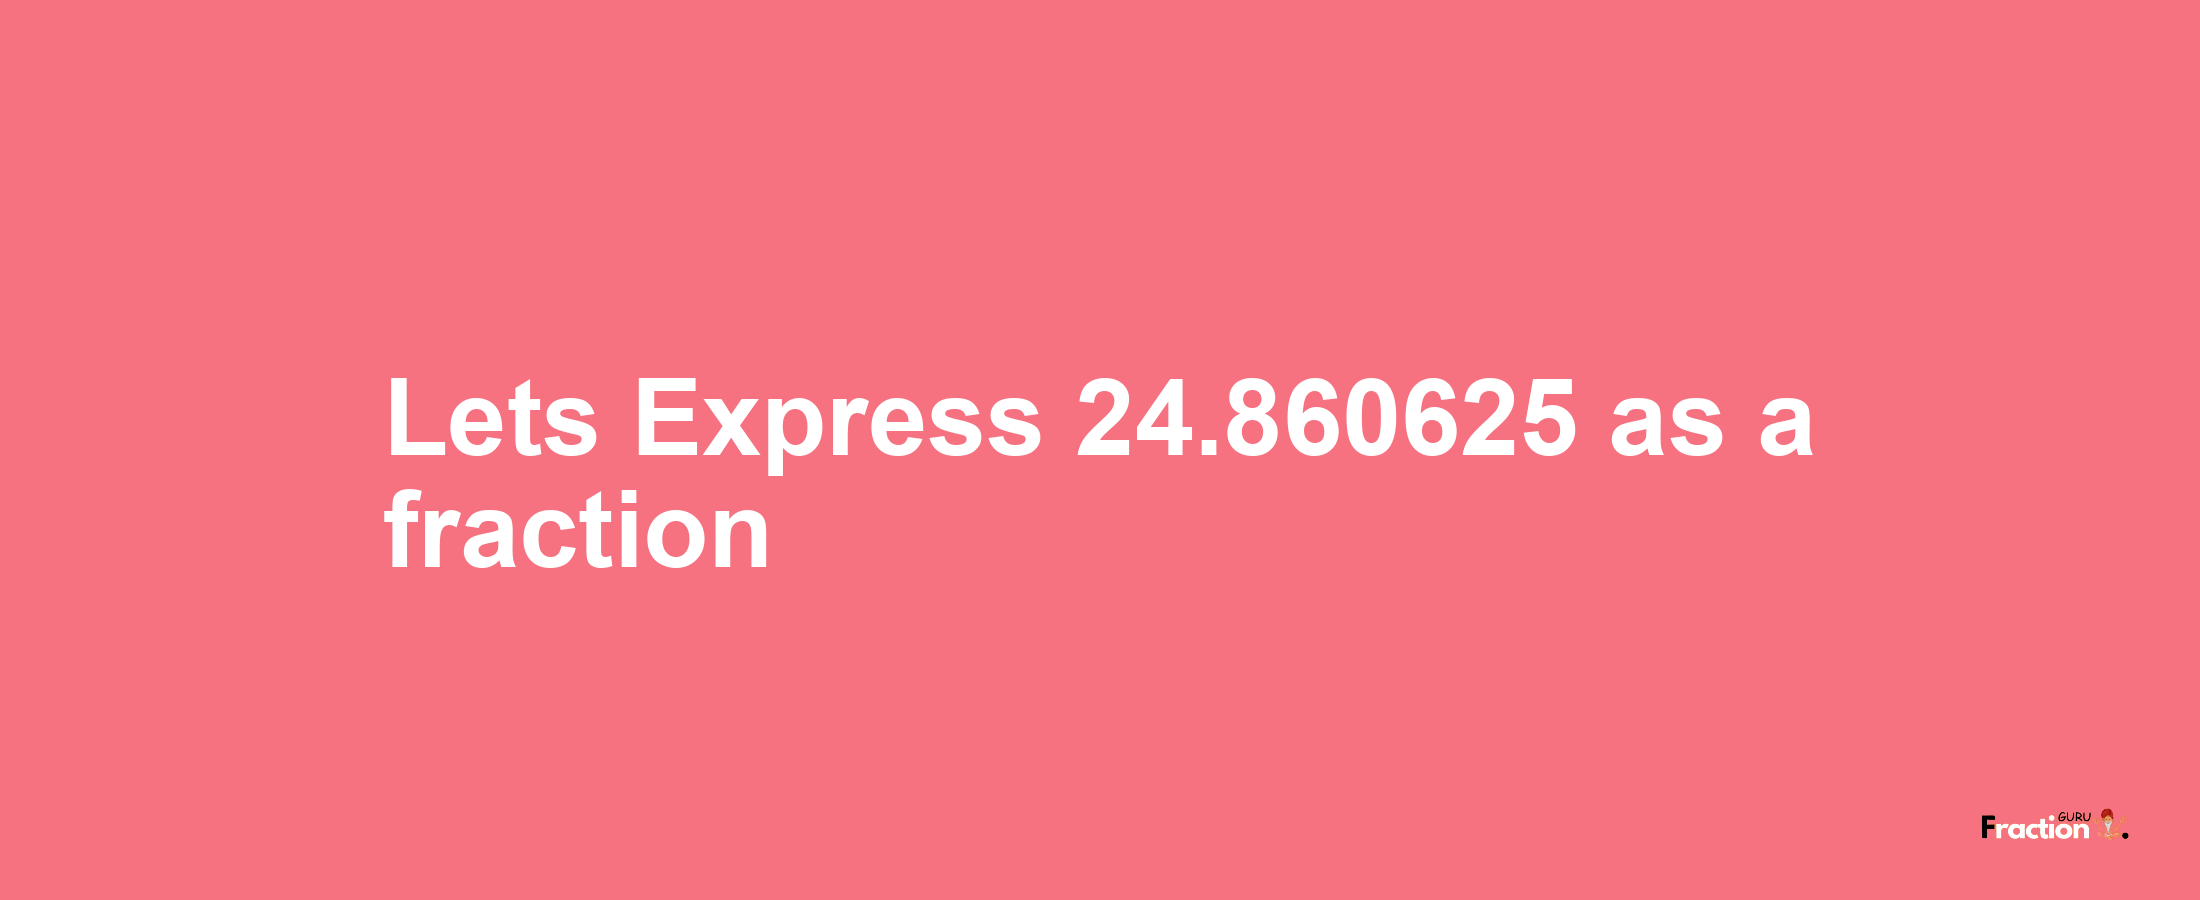 Lets Express 24.860625 as afraction